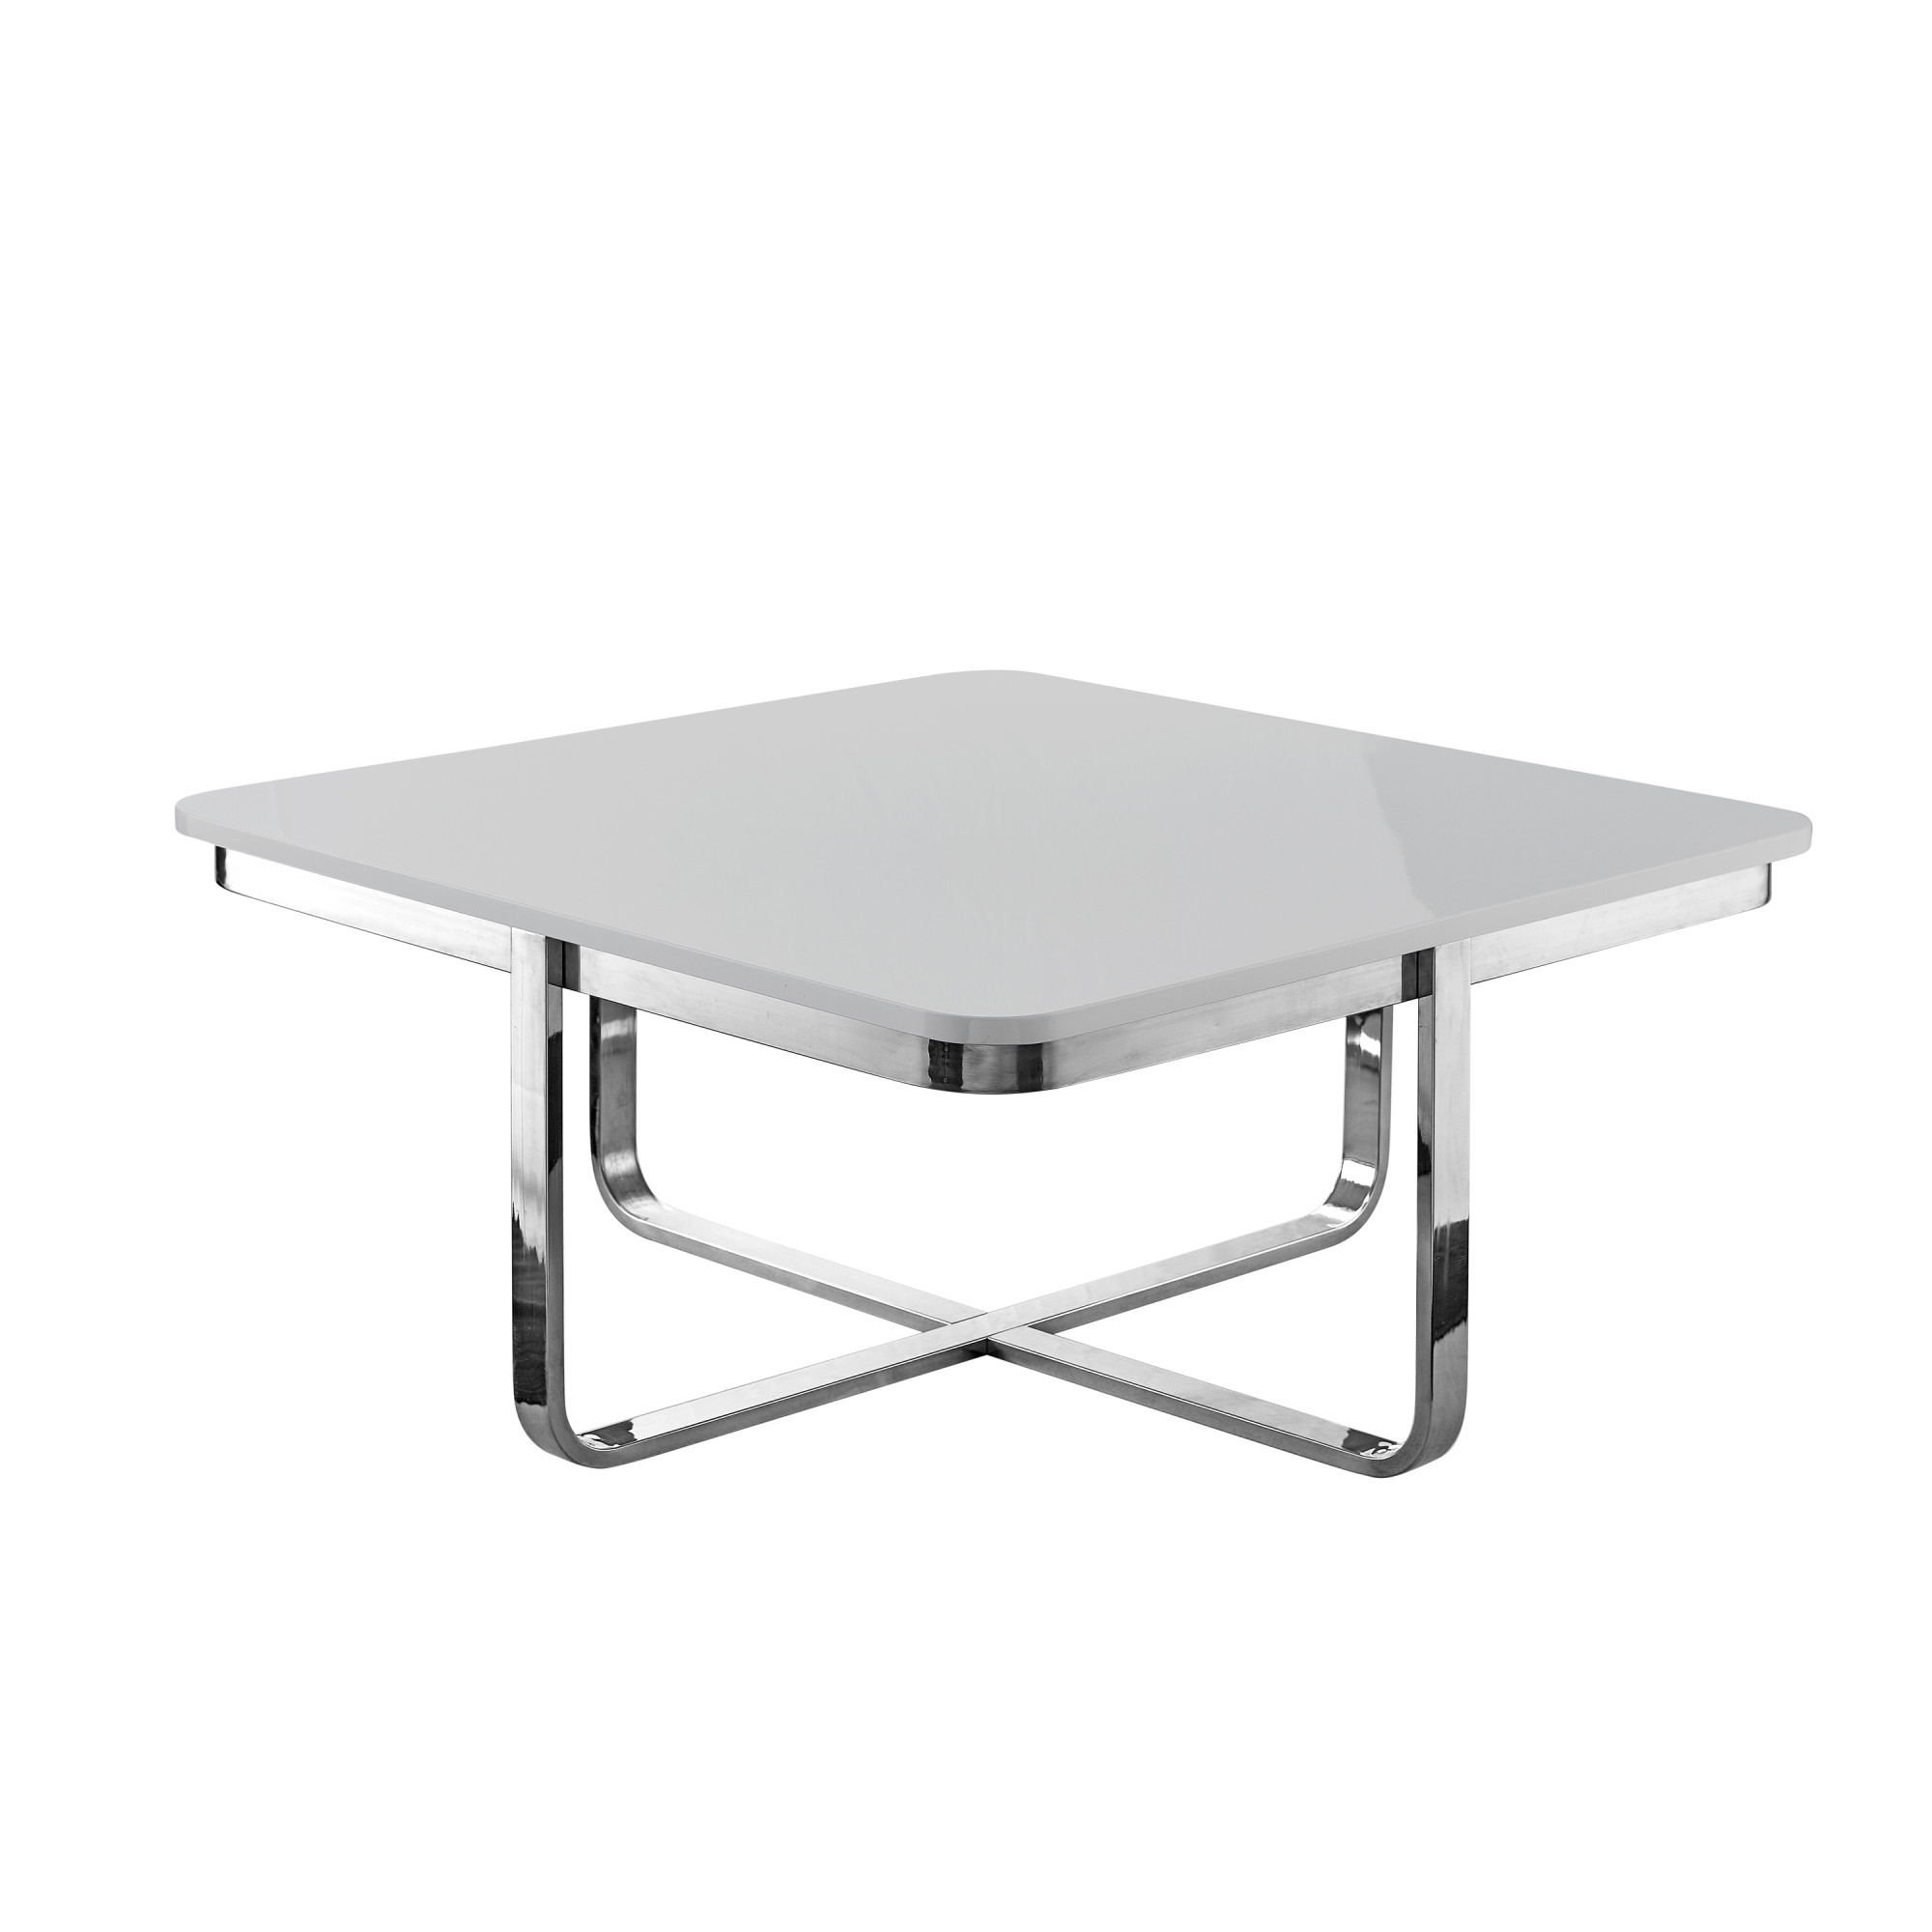 35" Light Gray And Silver Metallic Stainless Steel Square Coffee Table-543859-1